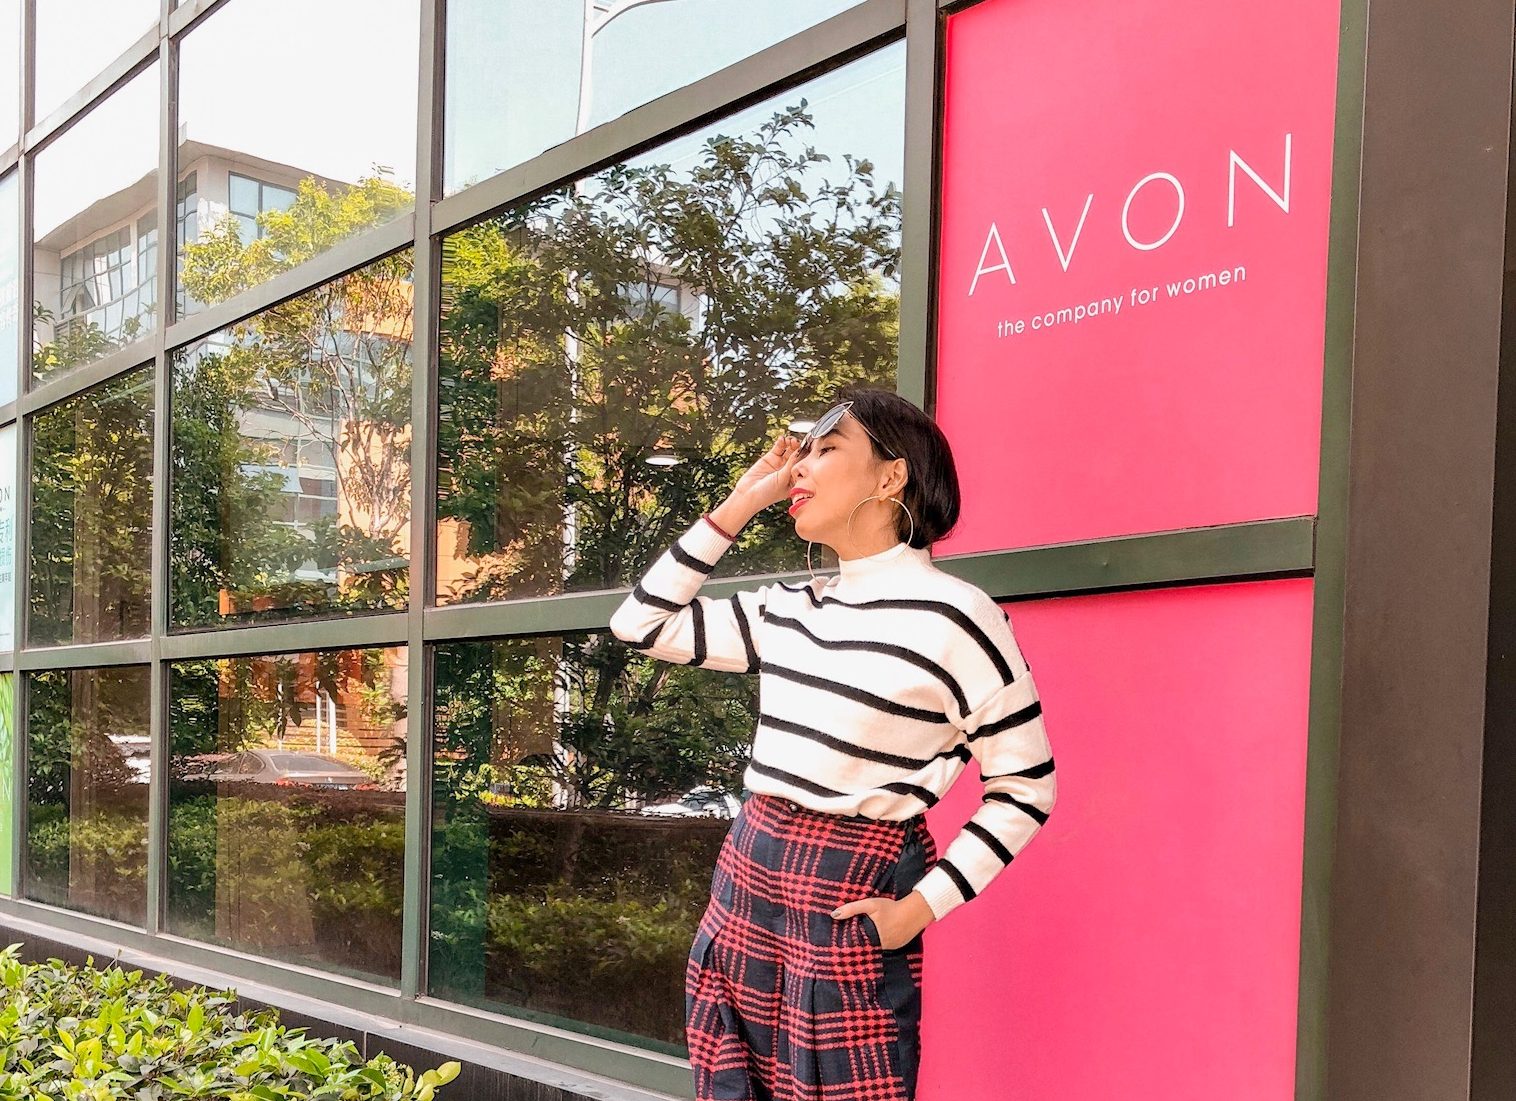 From an Avon Baby to a Beauty Insider: The Avon Experience Beyond the Catalogue